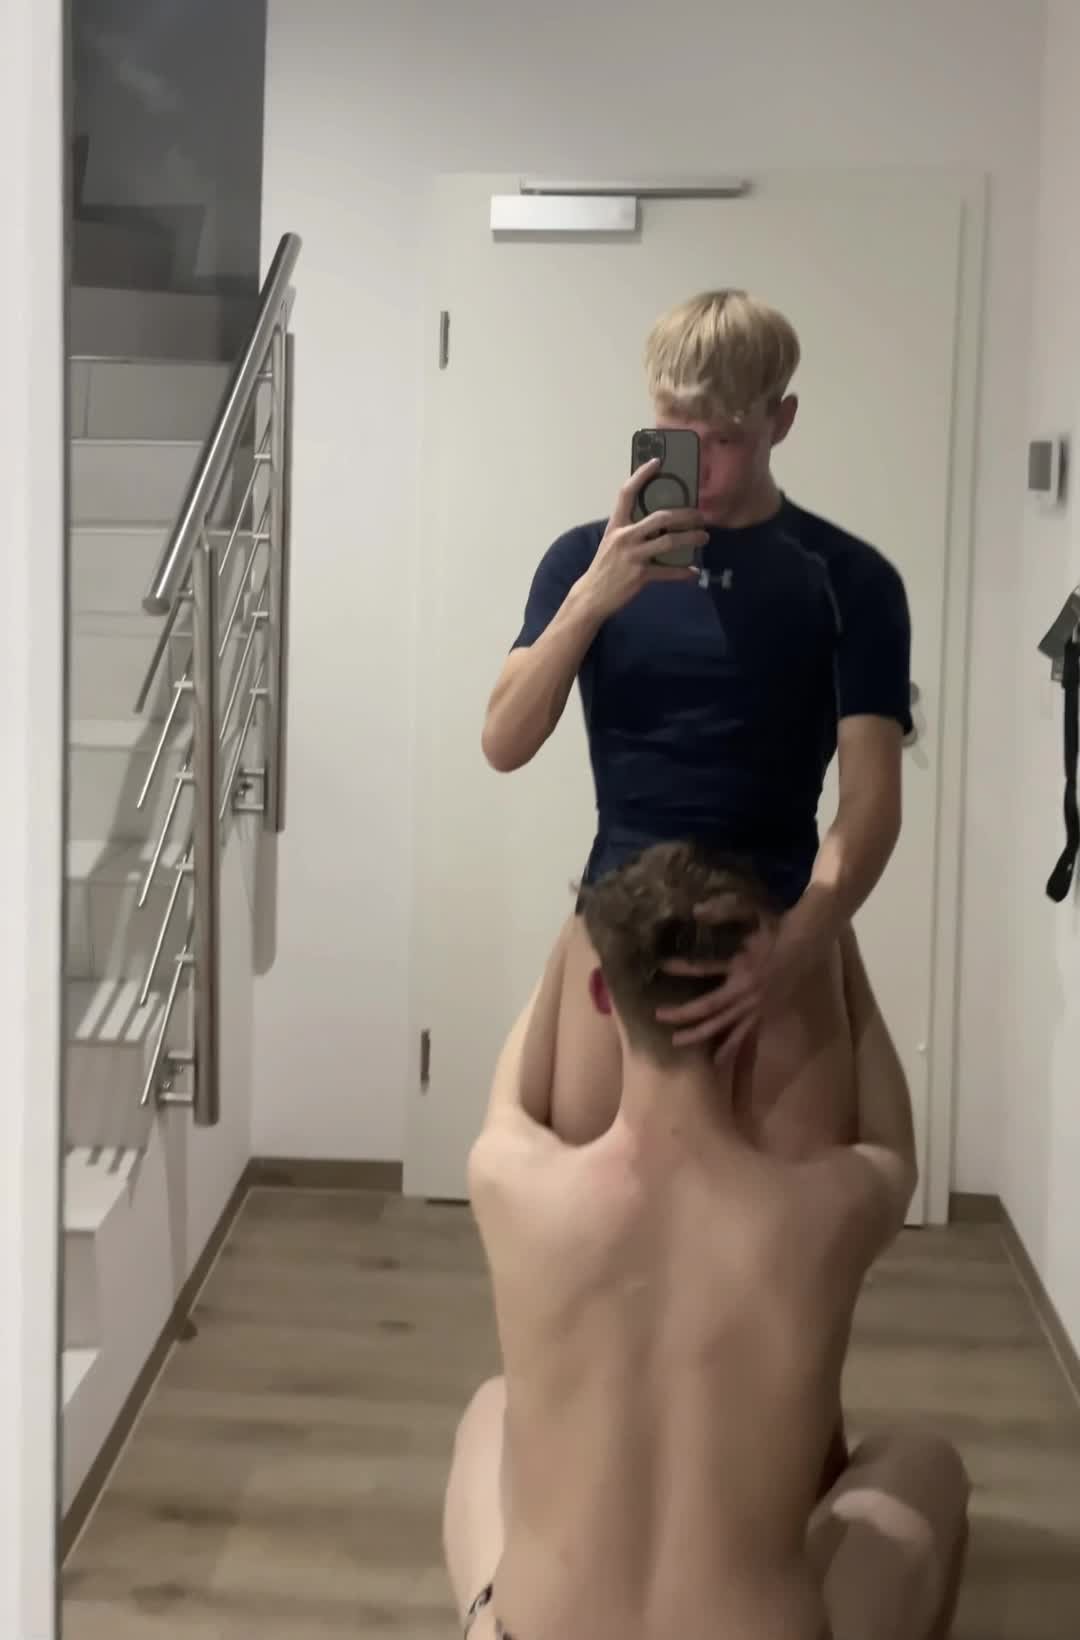 Video by jaayjakob with the username @jaayjakob, who is a verified user,  March 7, 2024 at 3:35 PM. The post is about the topic Gay and the text says 'My favorite toy 😈 

⇣ ⇣ ⇣  30% off⚡️ ⇣ ⇣ ⇣

onlyfans.com/jaayjakob'